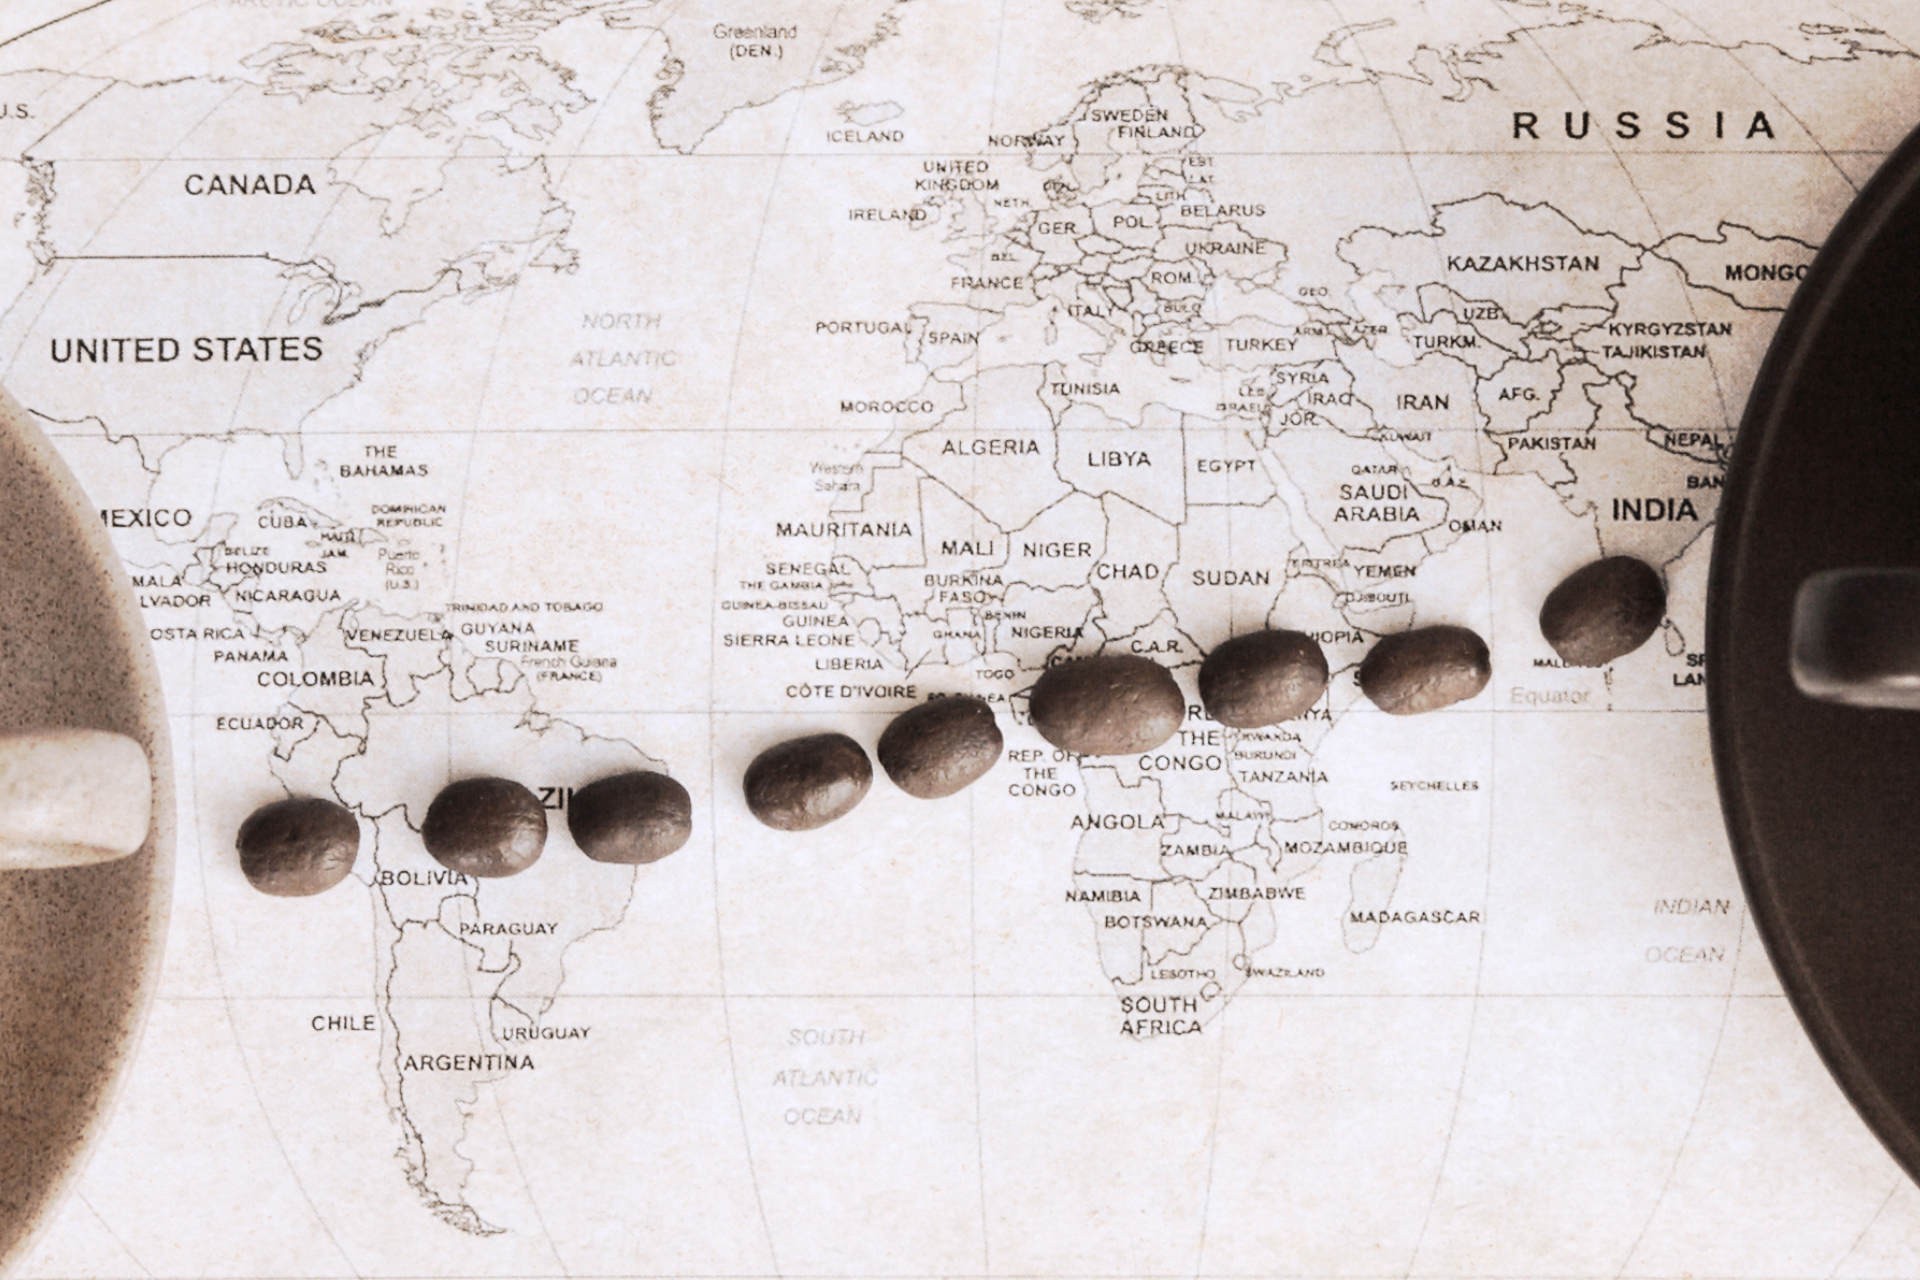 Coffee Cultures around the world